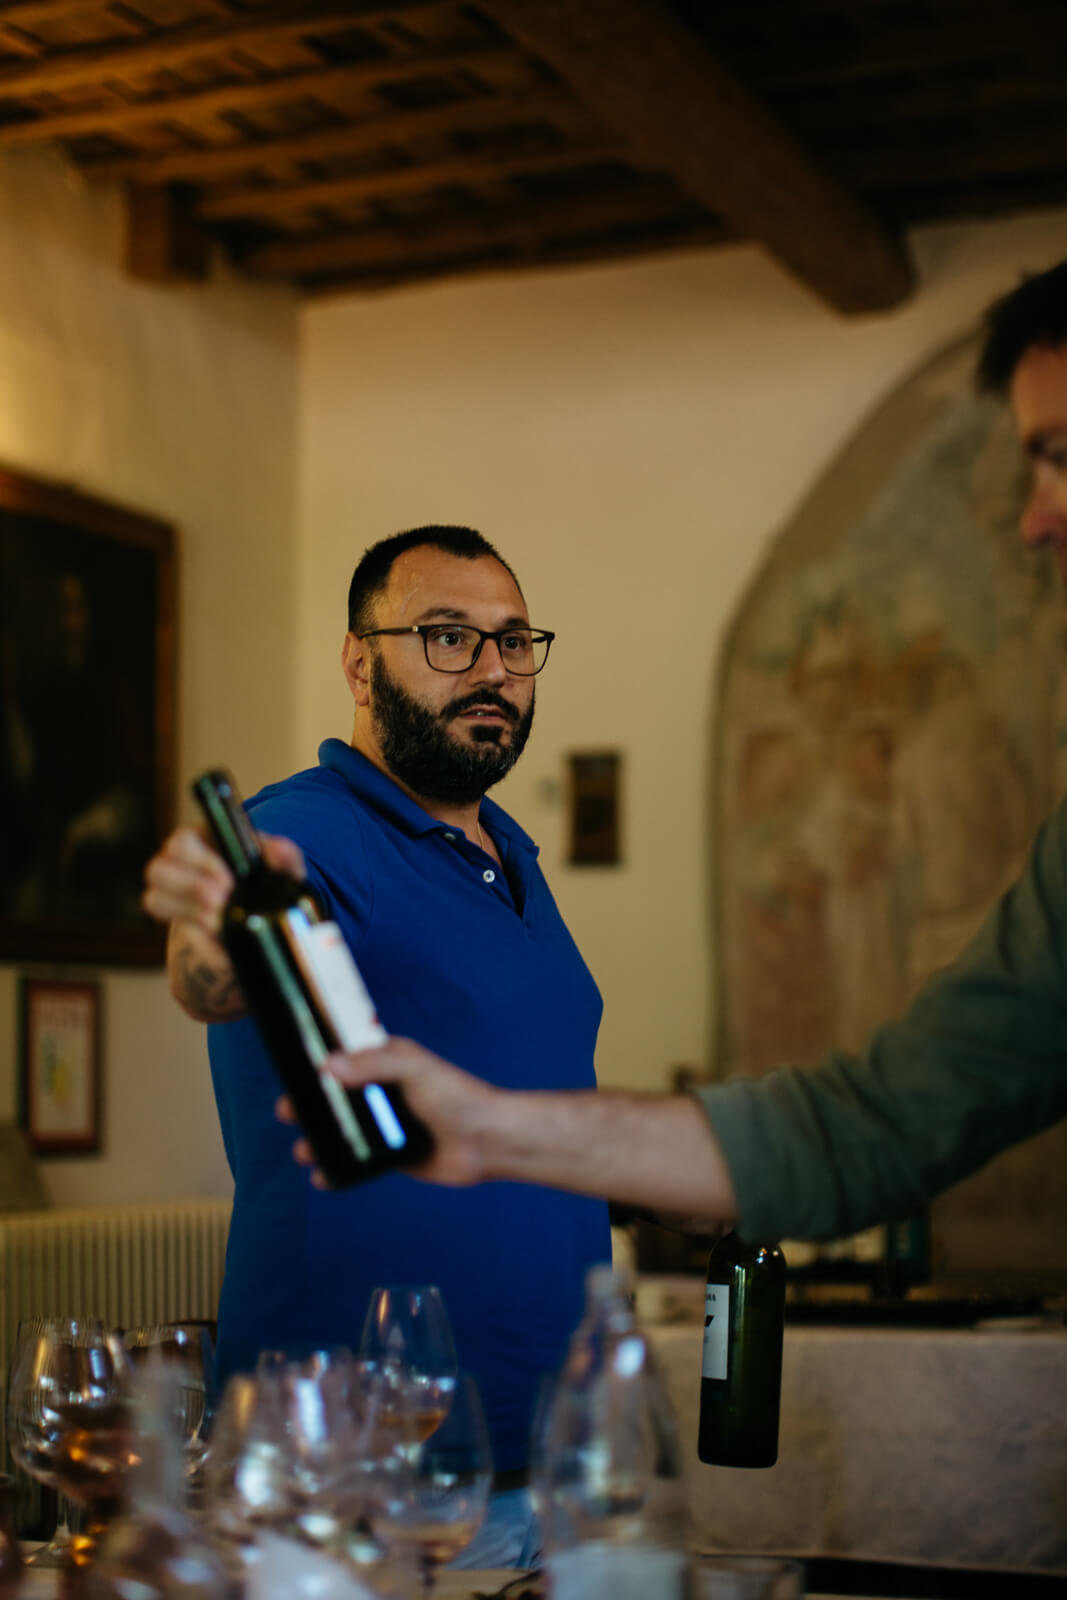 Person inspecting a bottle of wine